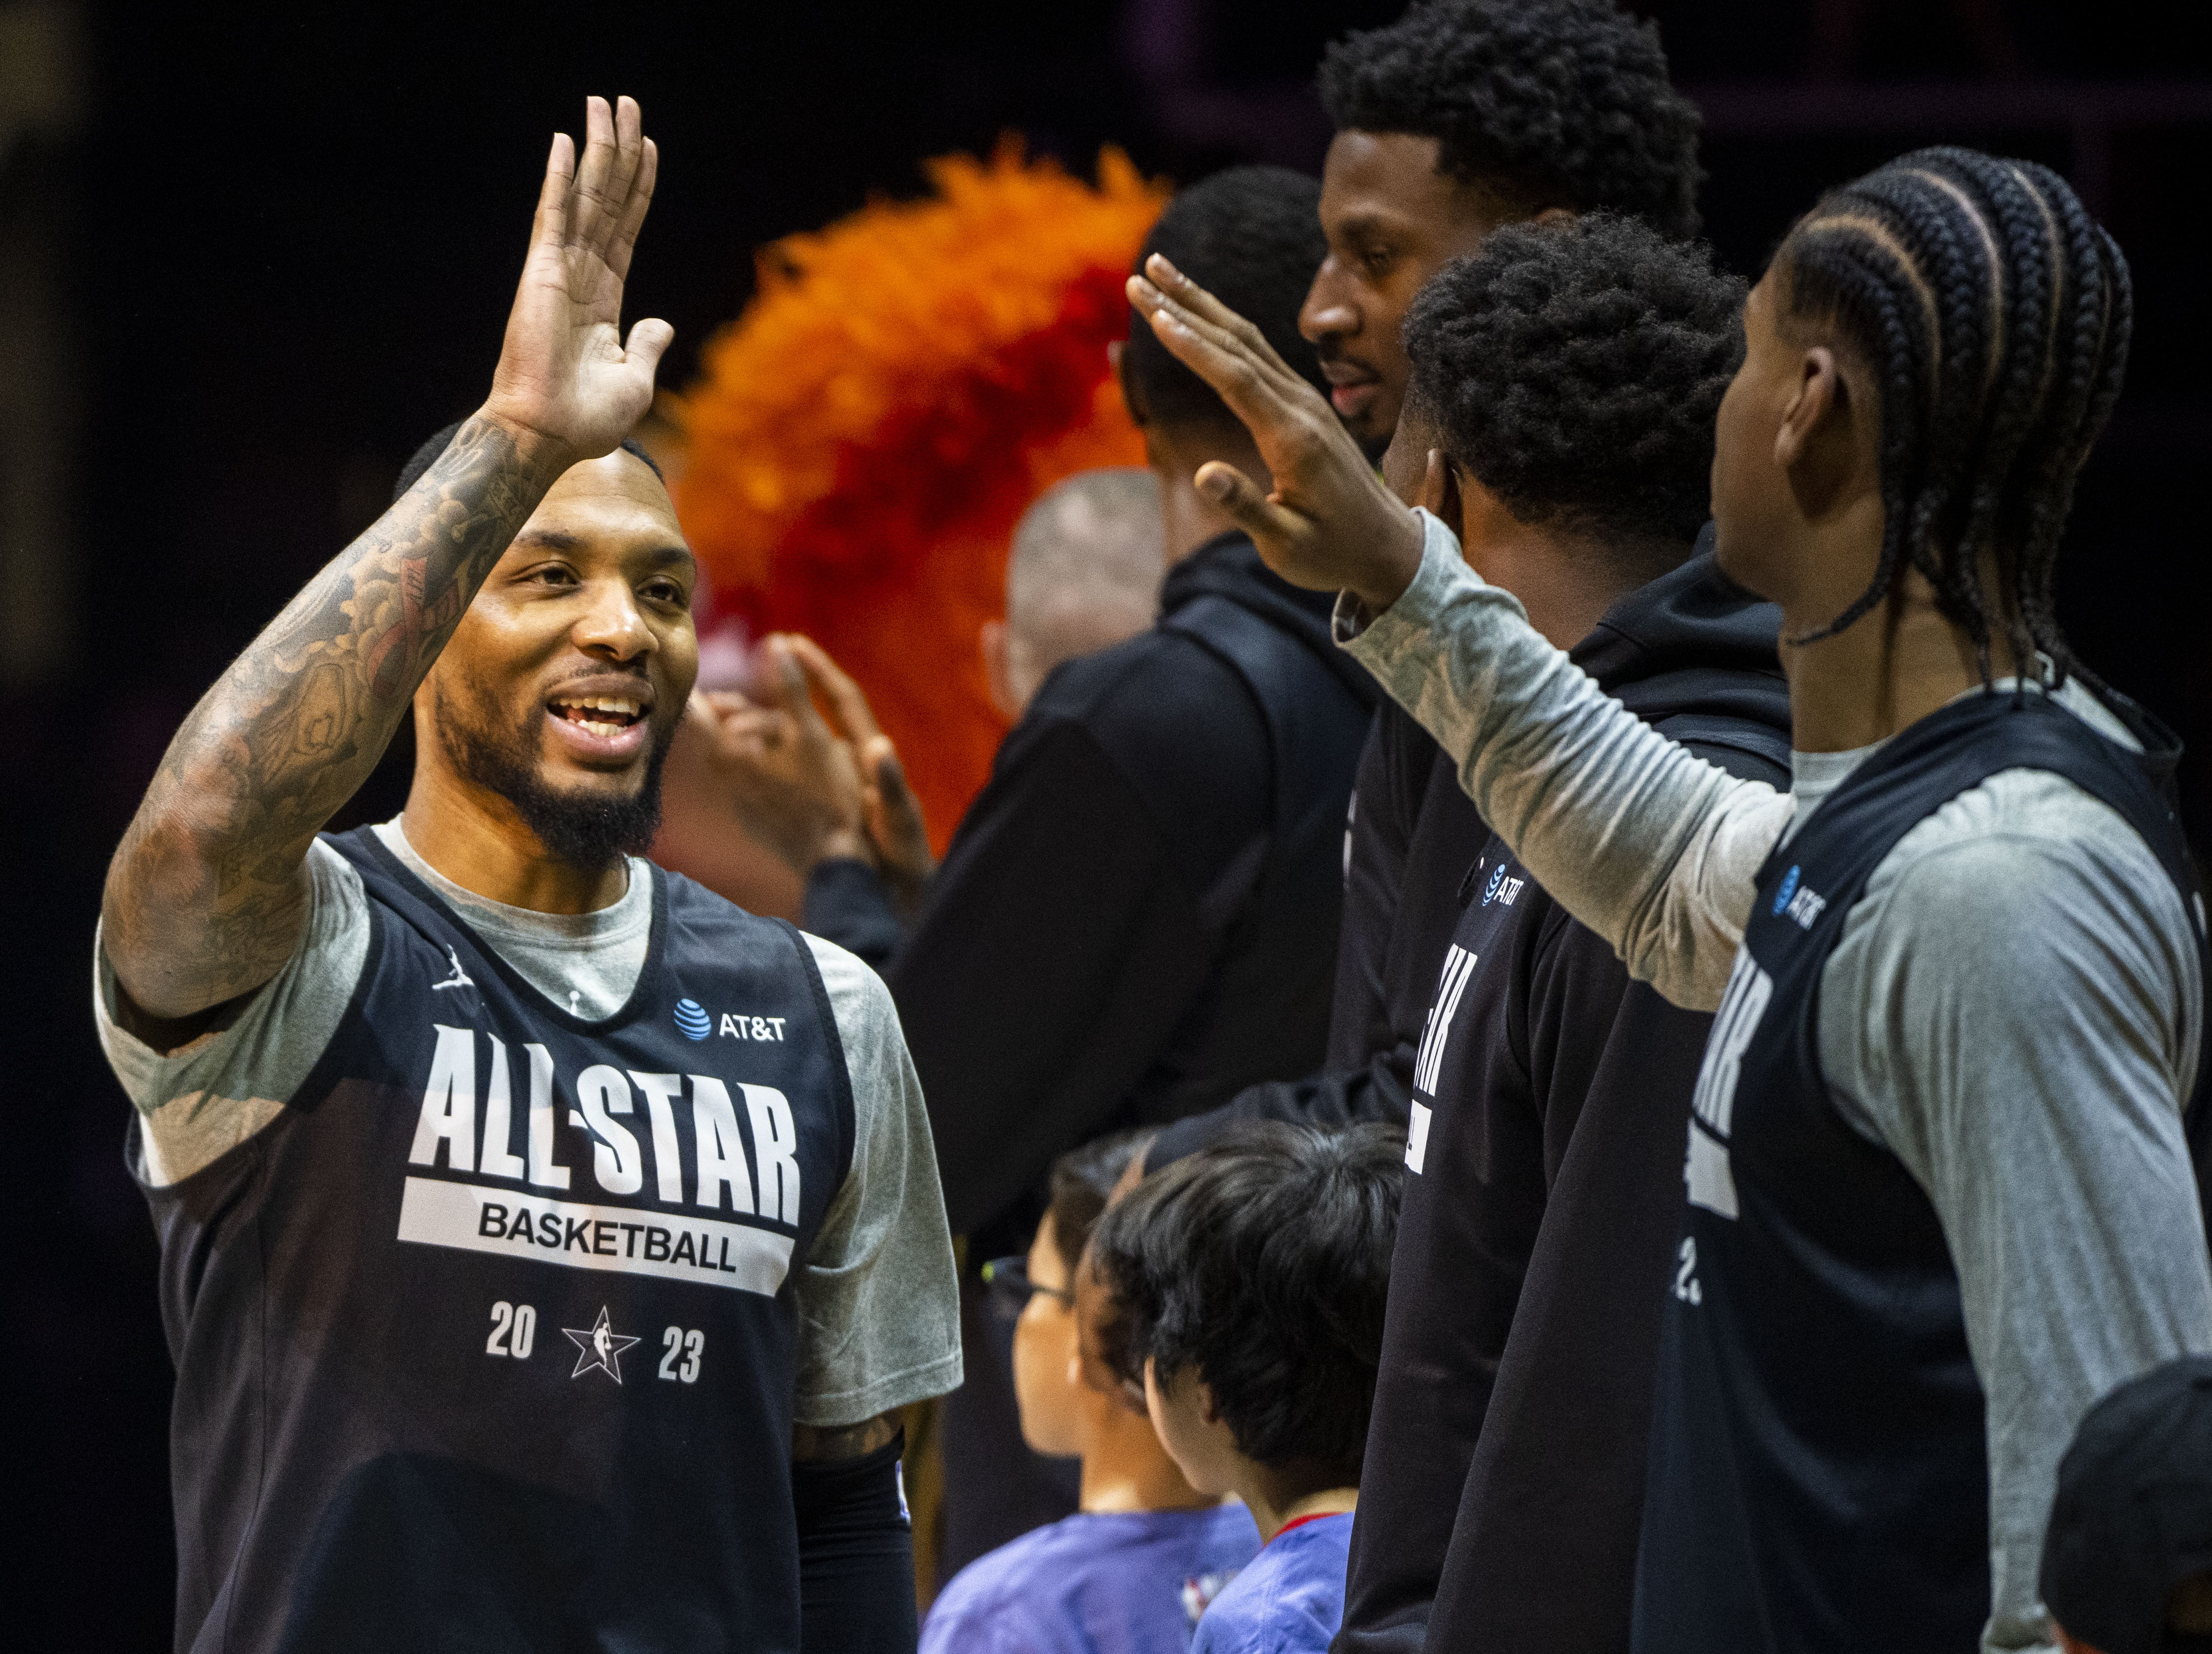 Lillard wore his college jersey at 3-Point Contest and fans love it